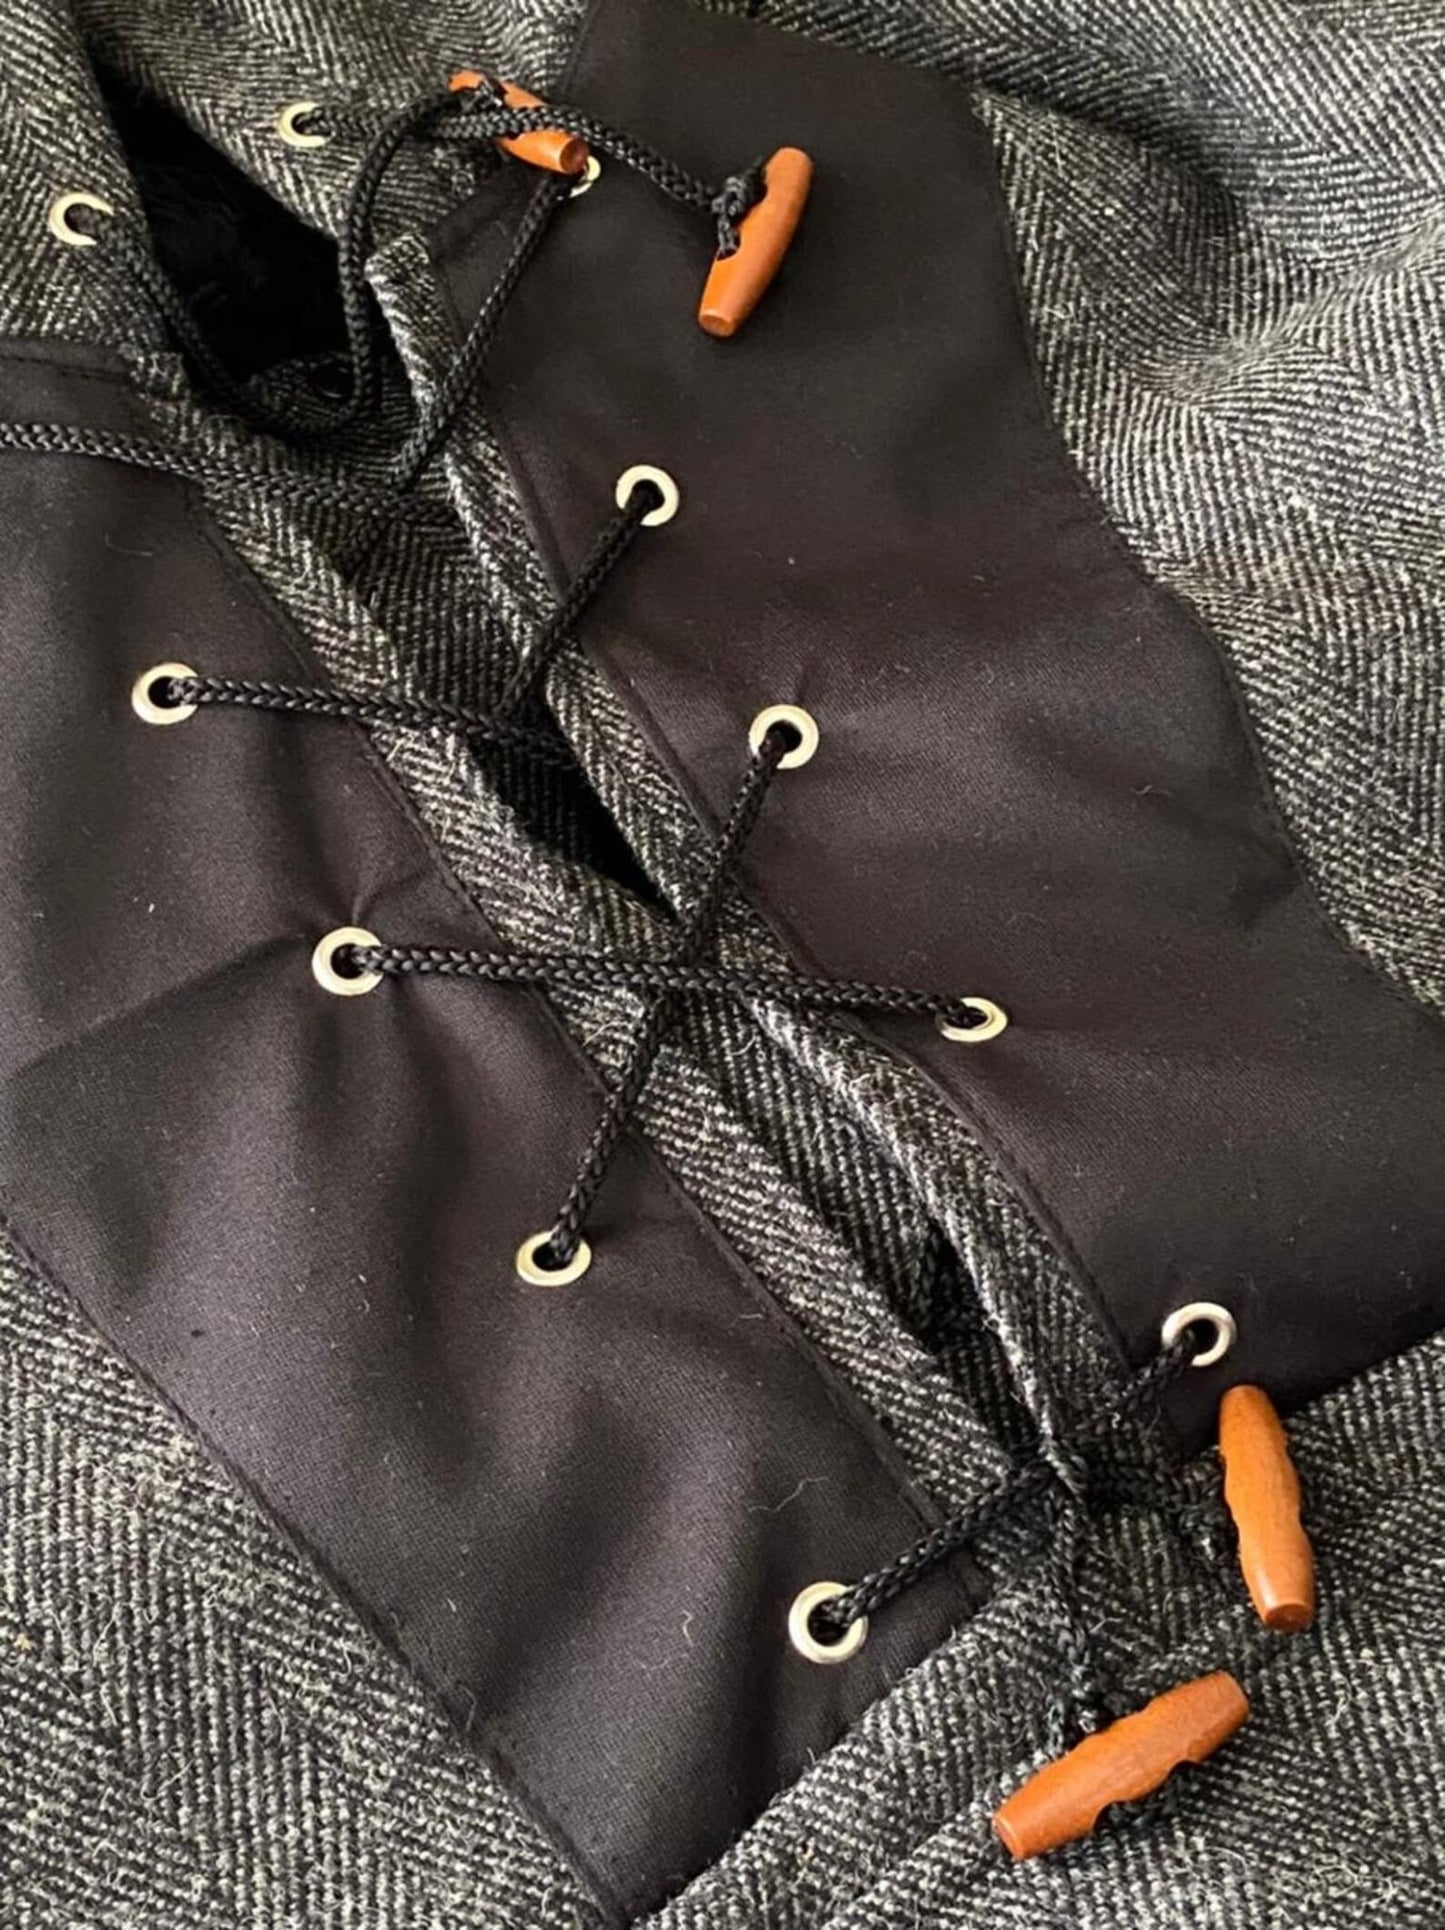 Bespoke Anorak | Bushcraft | Camping | Anorak , You will be ready for adventure, Best Protection For Cold, Full Handmade  99percenthandmade   